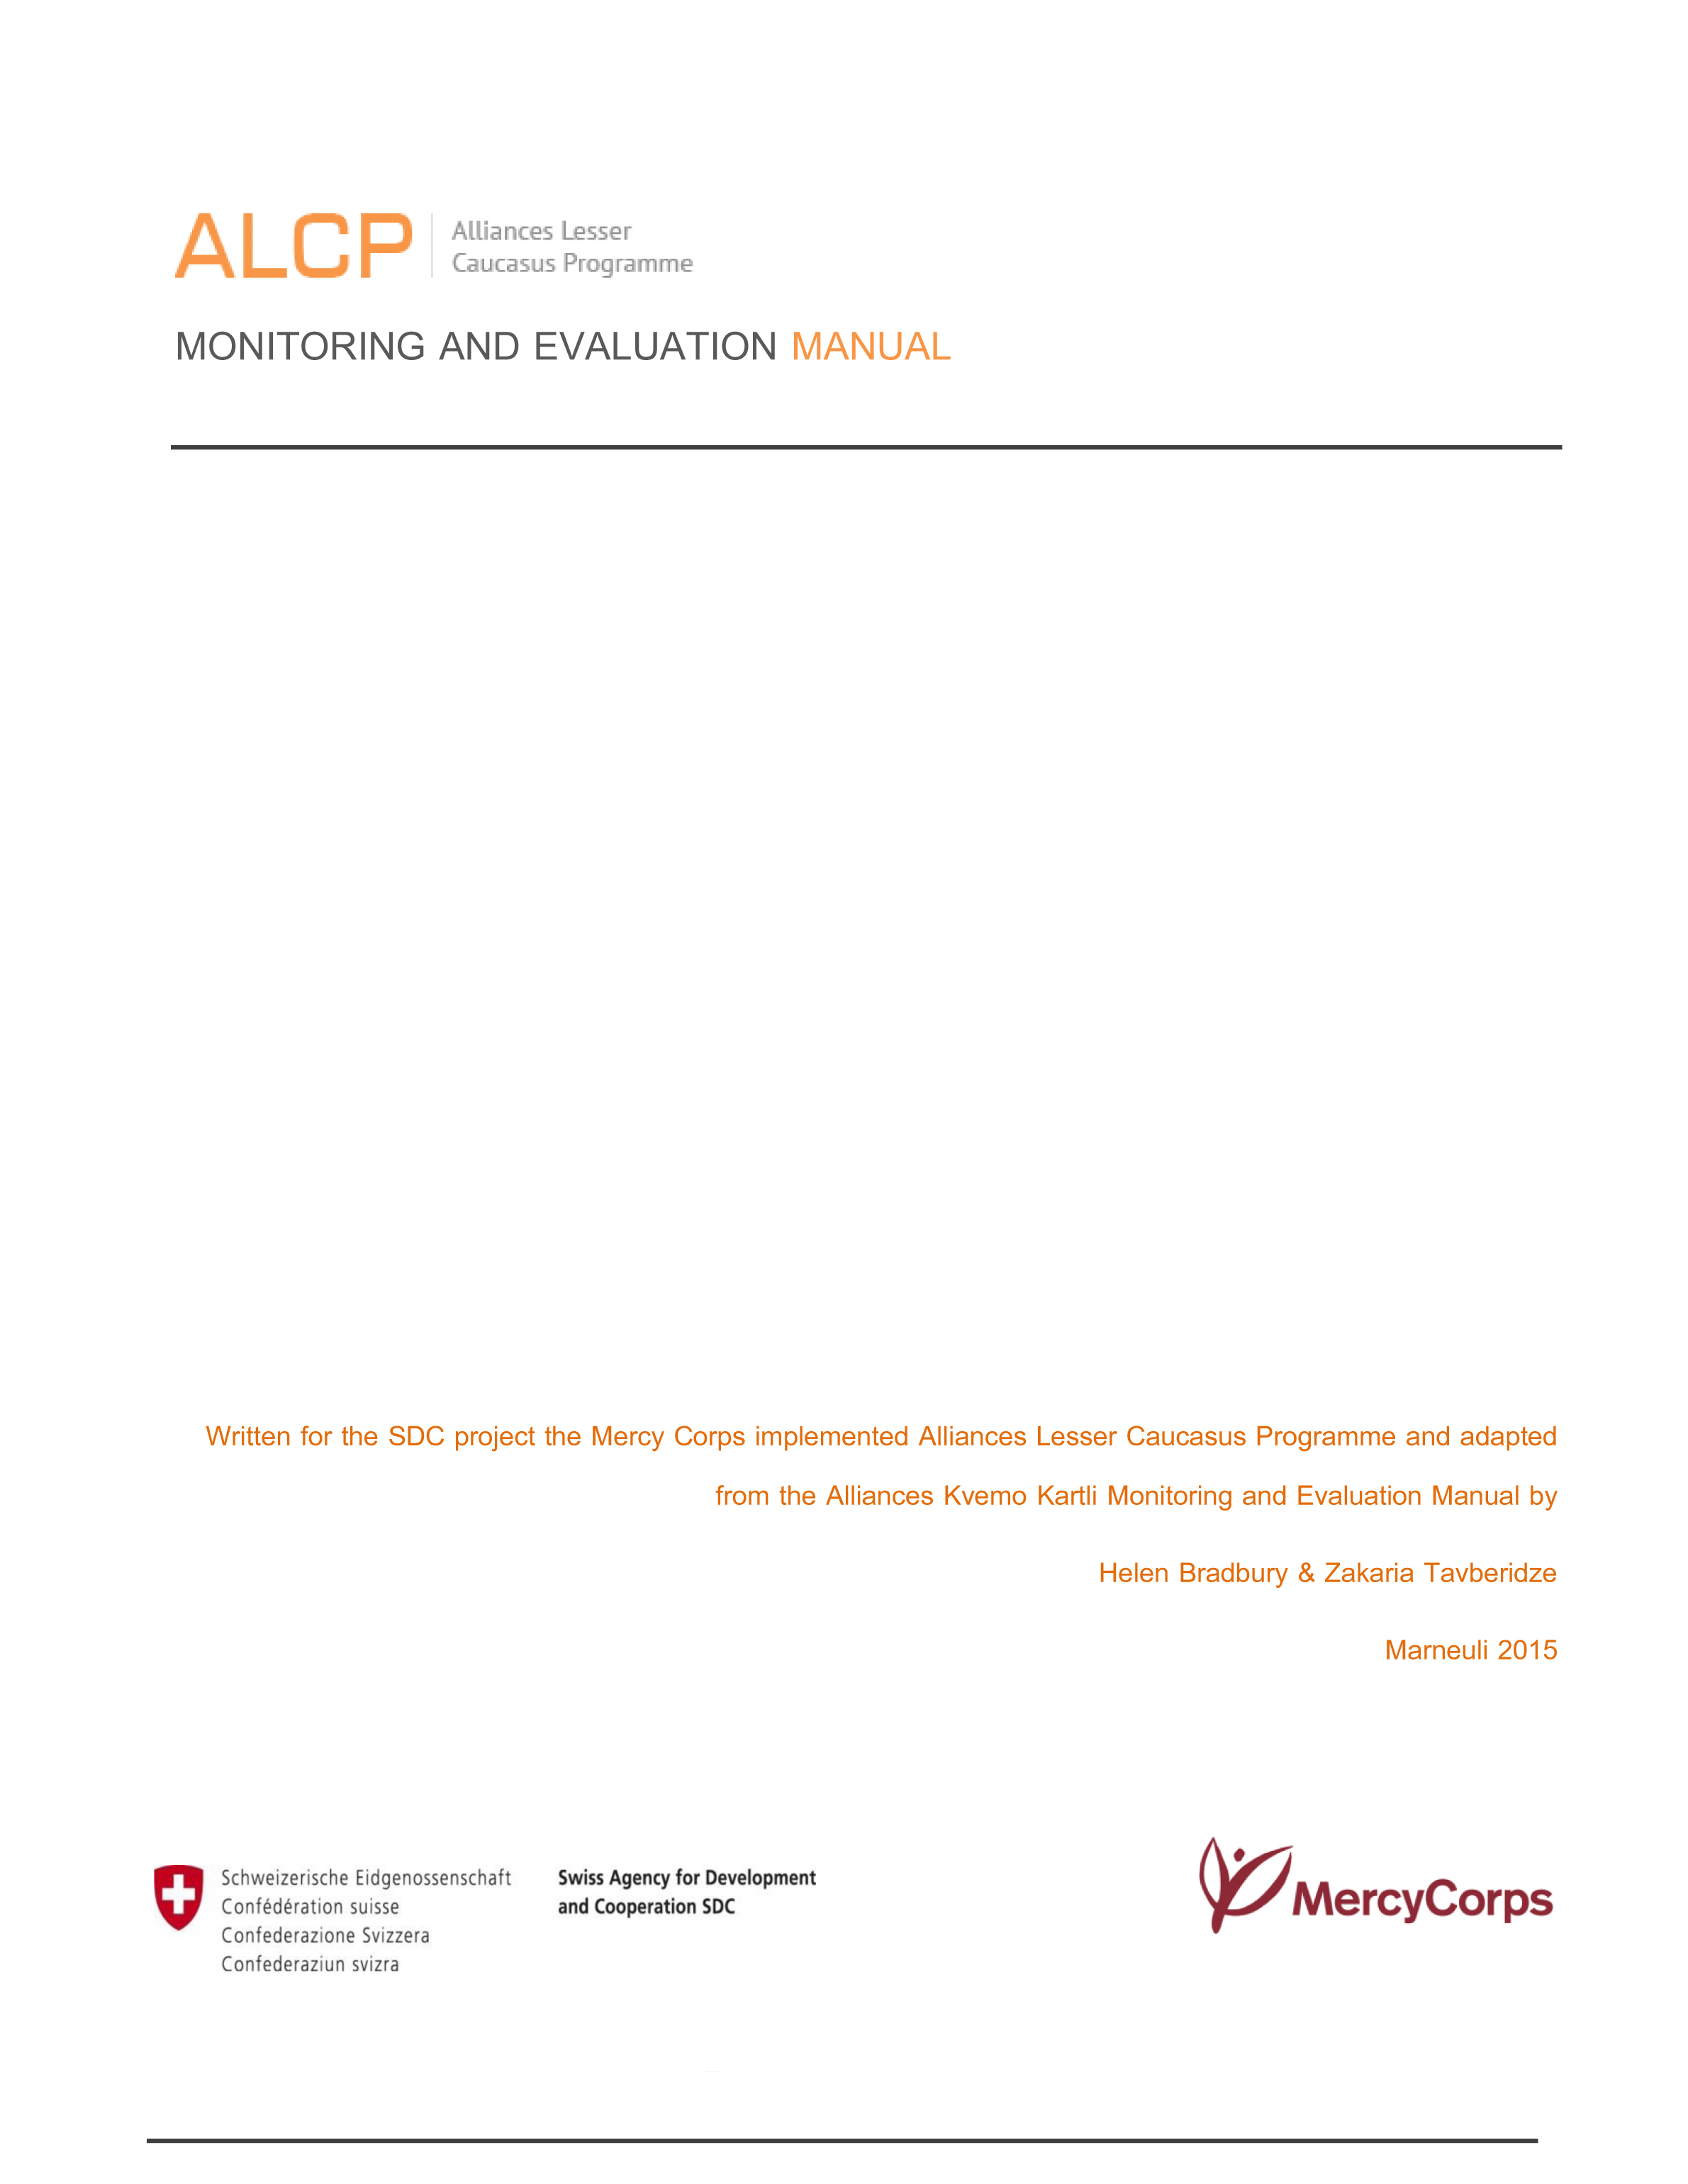 ALCP Monitoring and Evaluation Manual 2015